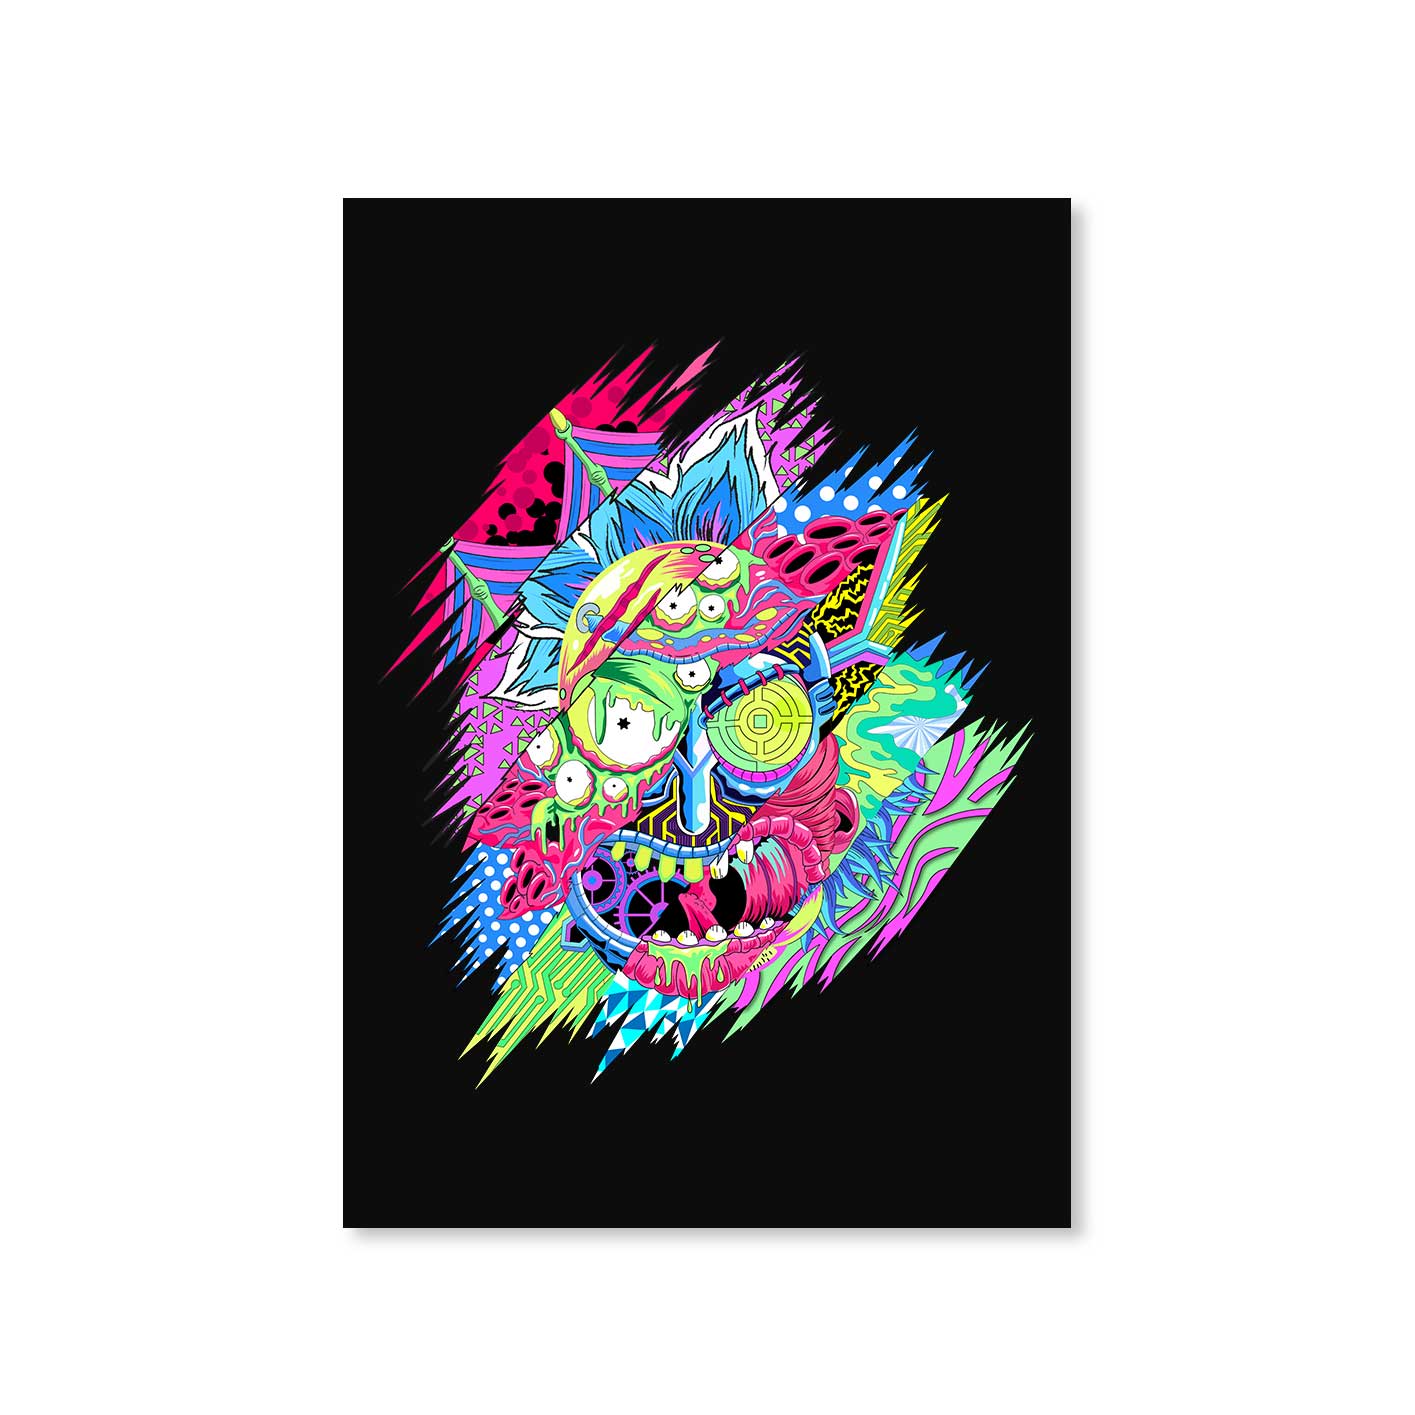 rick and morty fan art poster wall art buy online india the banyan tee tbt a4 rick and morty online summer beth mr meeseeks jerry quote vector art clothing accessories merchandise